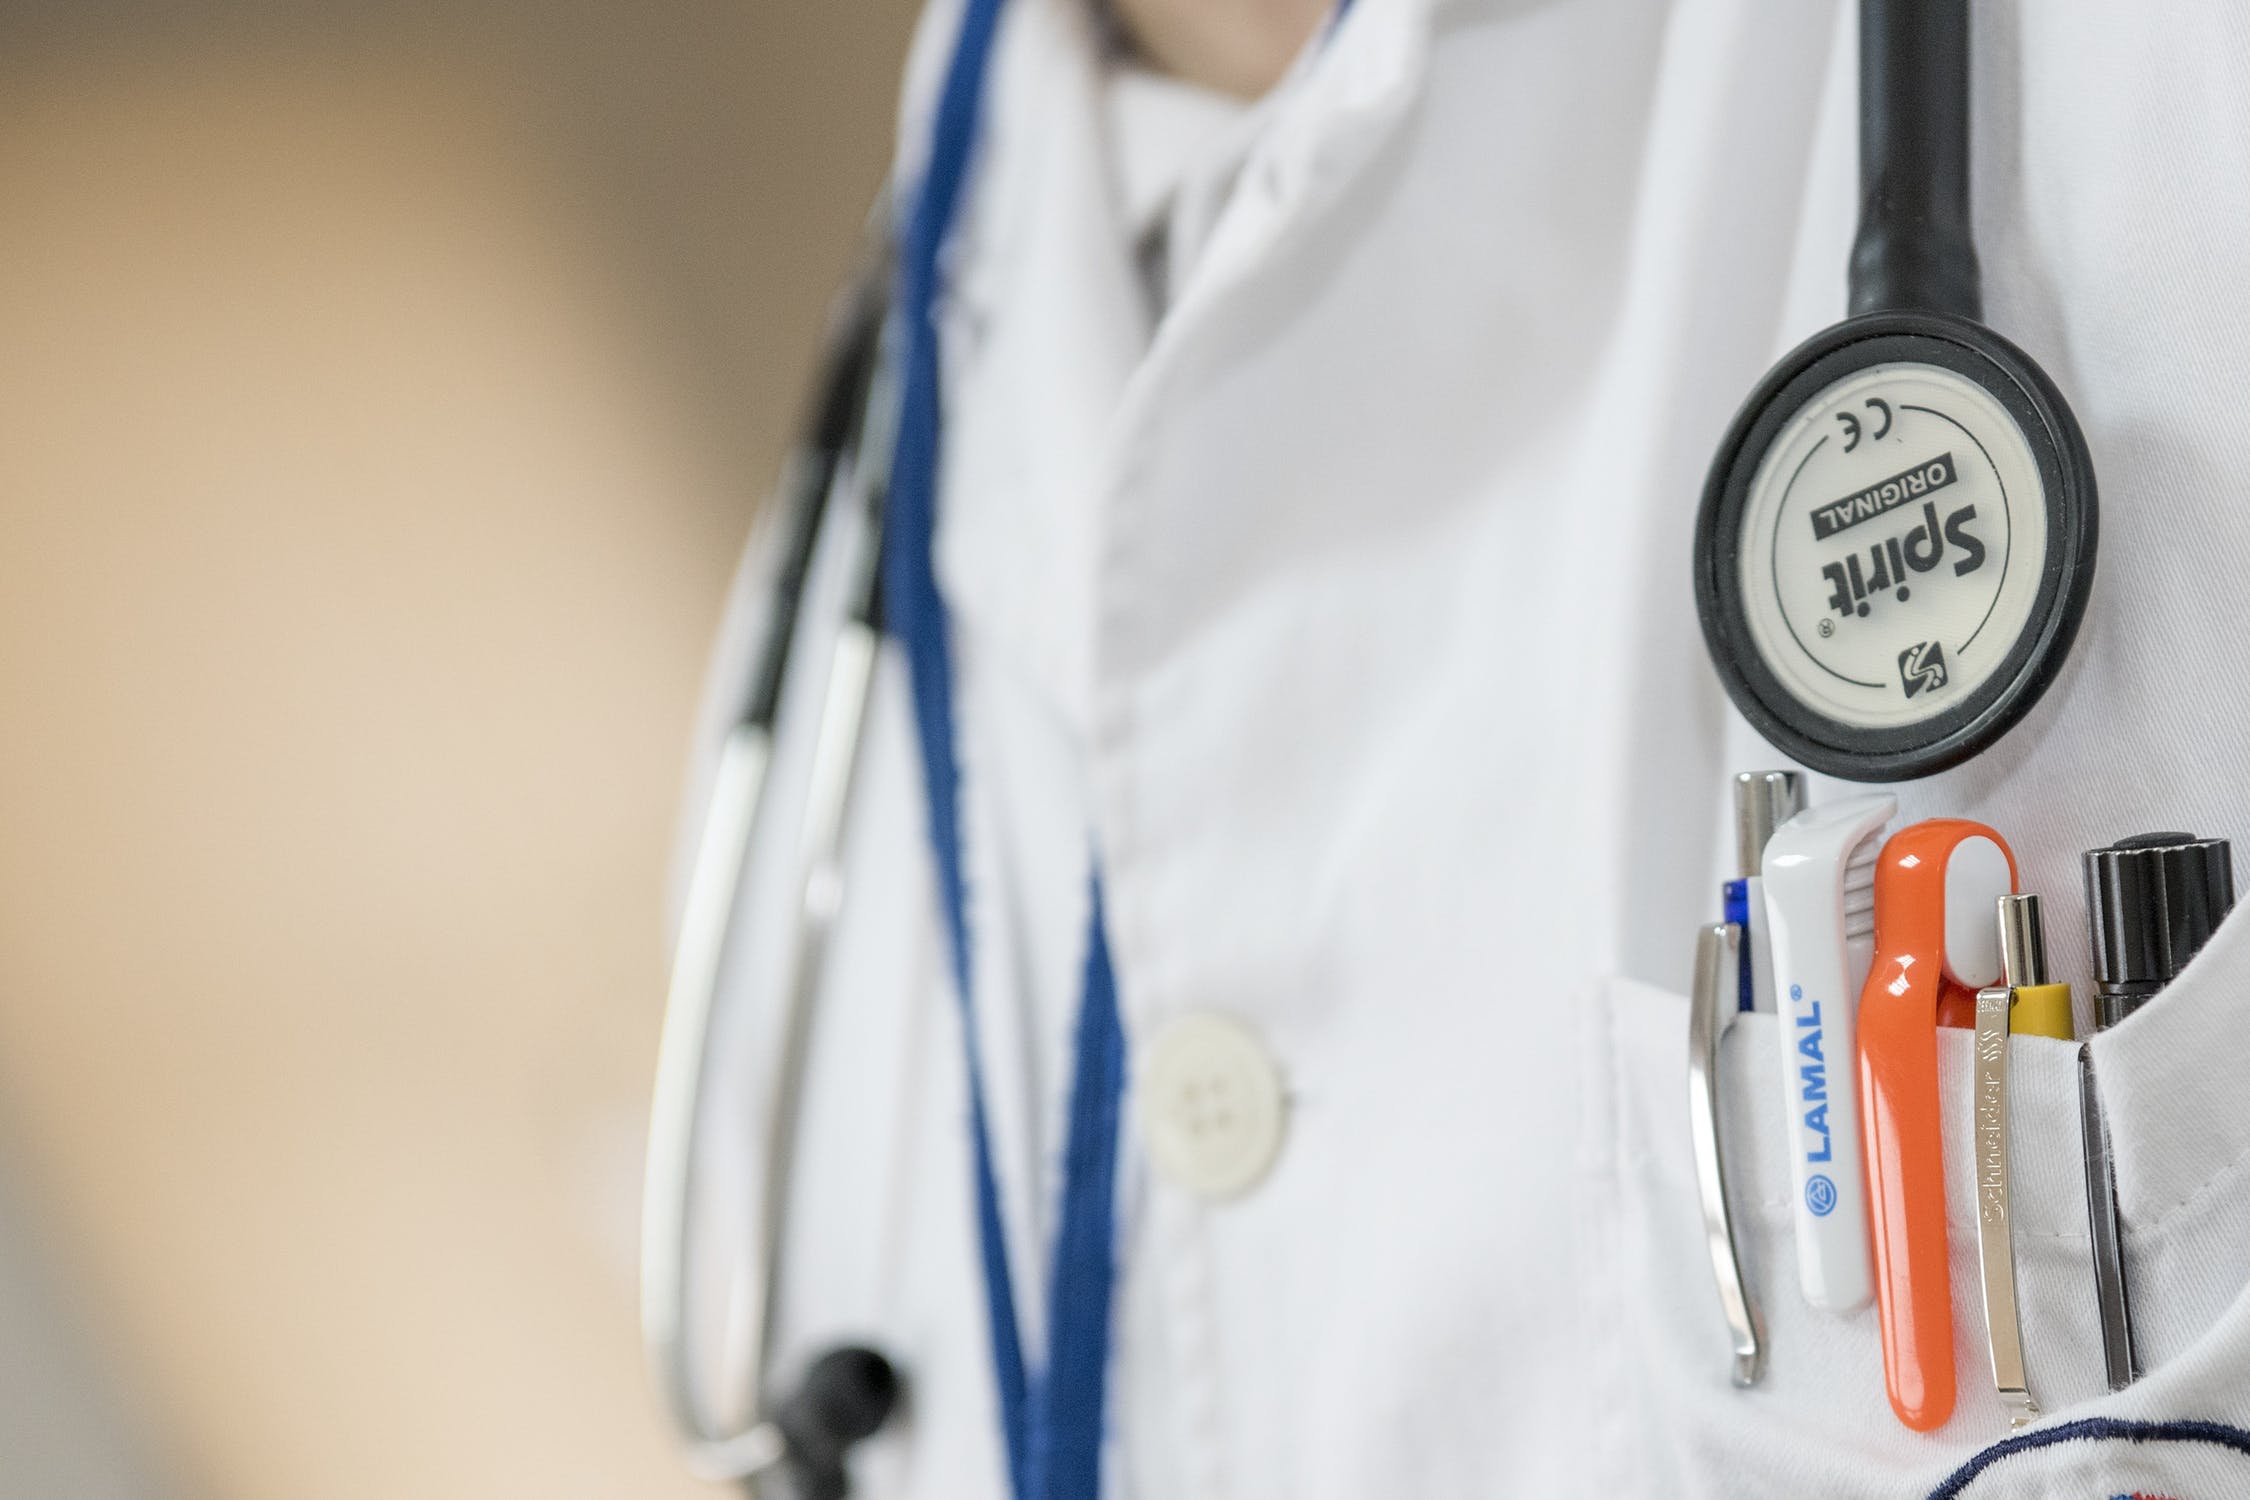 Image of doctors coat with pens in pocket and stethoscope